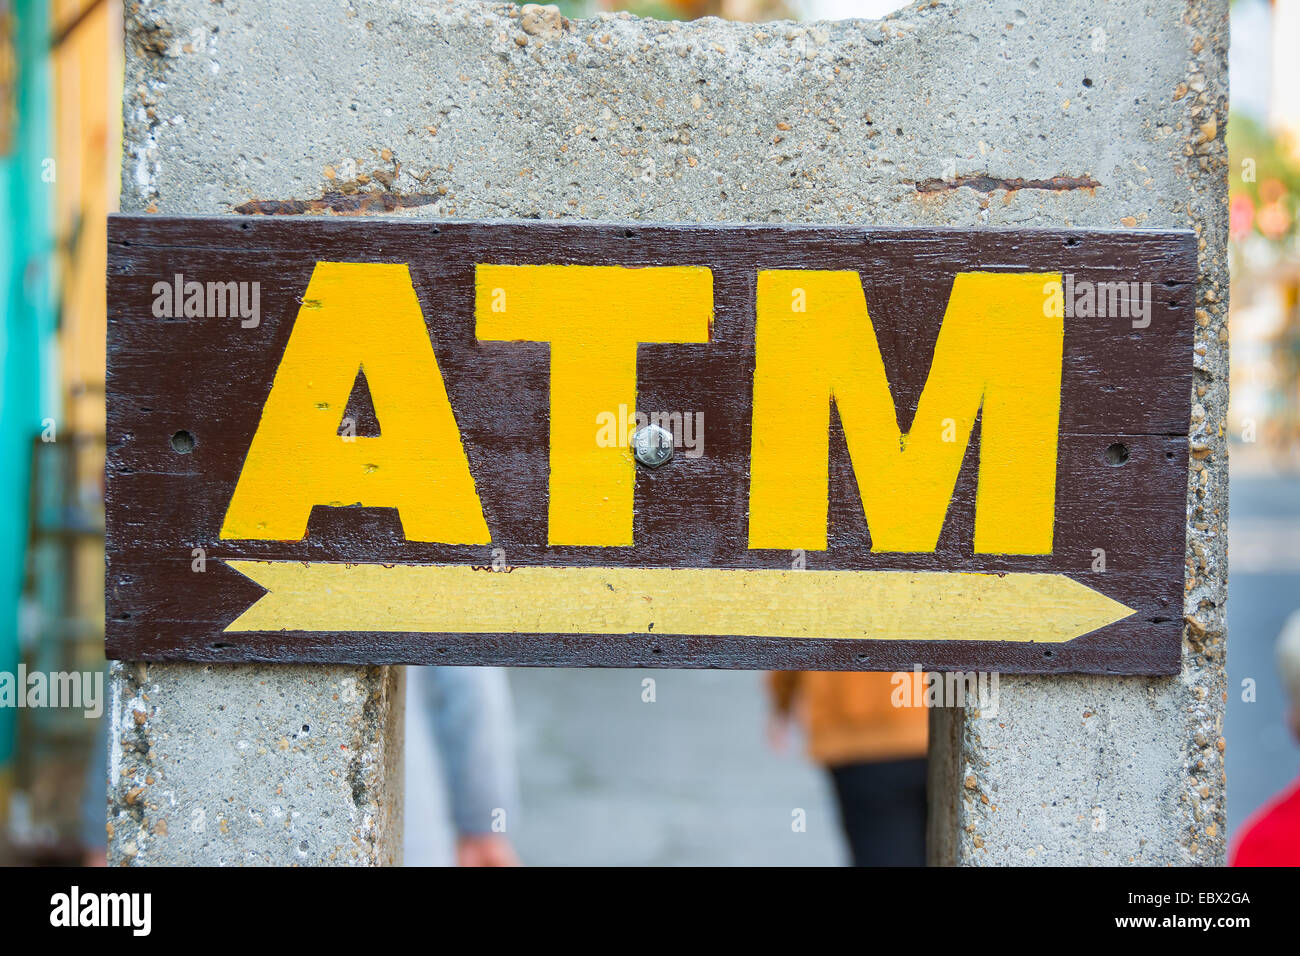 ATM machine sign hand painted Stock Photo